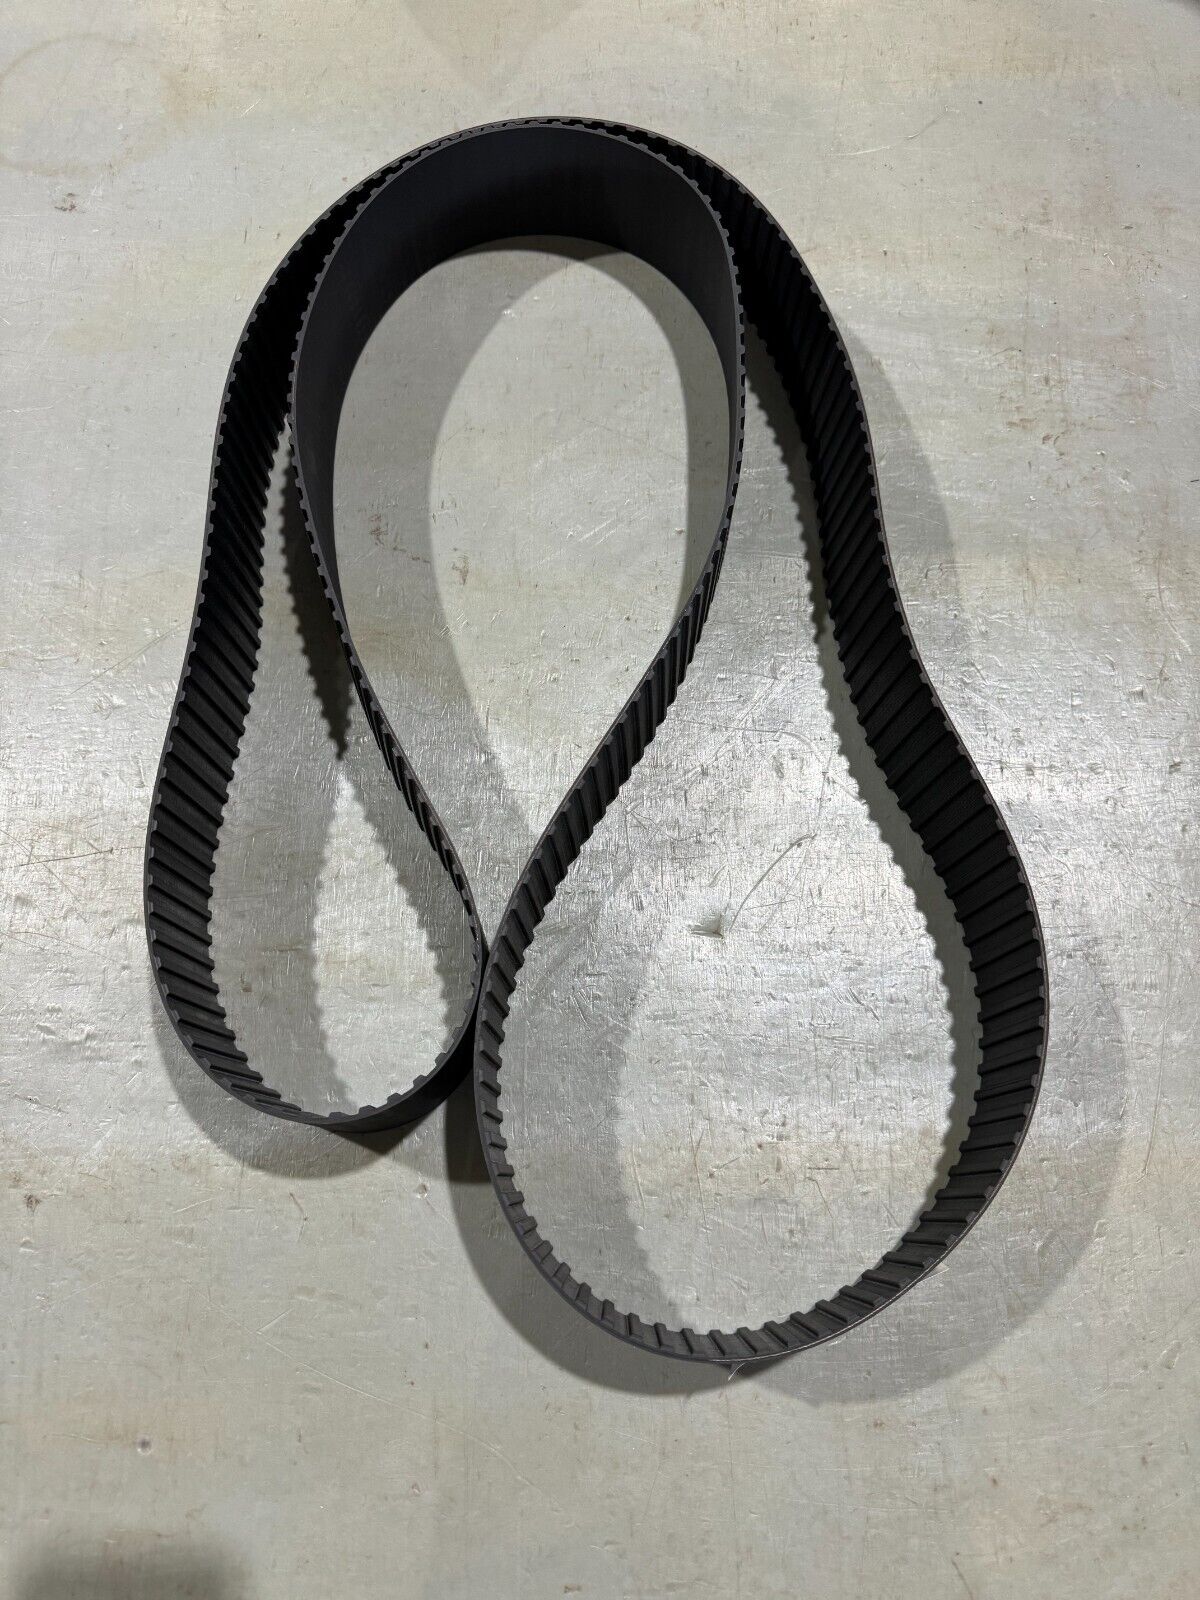 FACTORY NEW GOODYEAR SYNCHRONOUS Trapezoidal TIMING BELT 1140H300